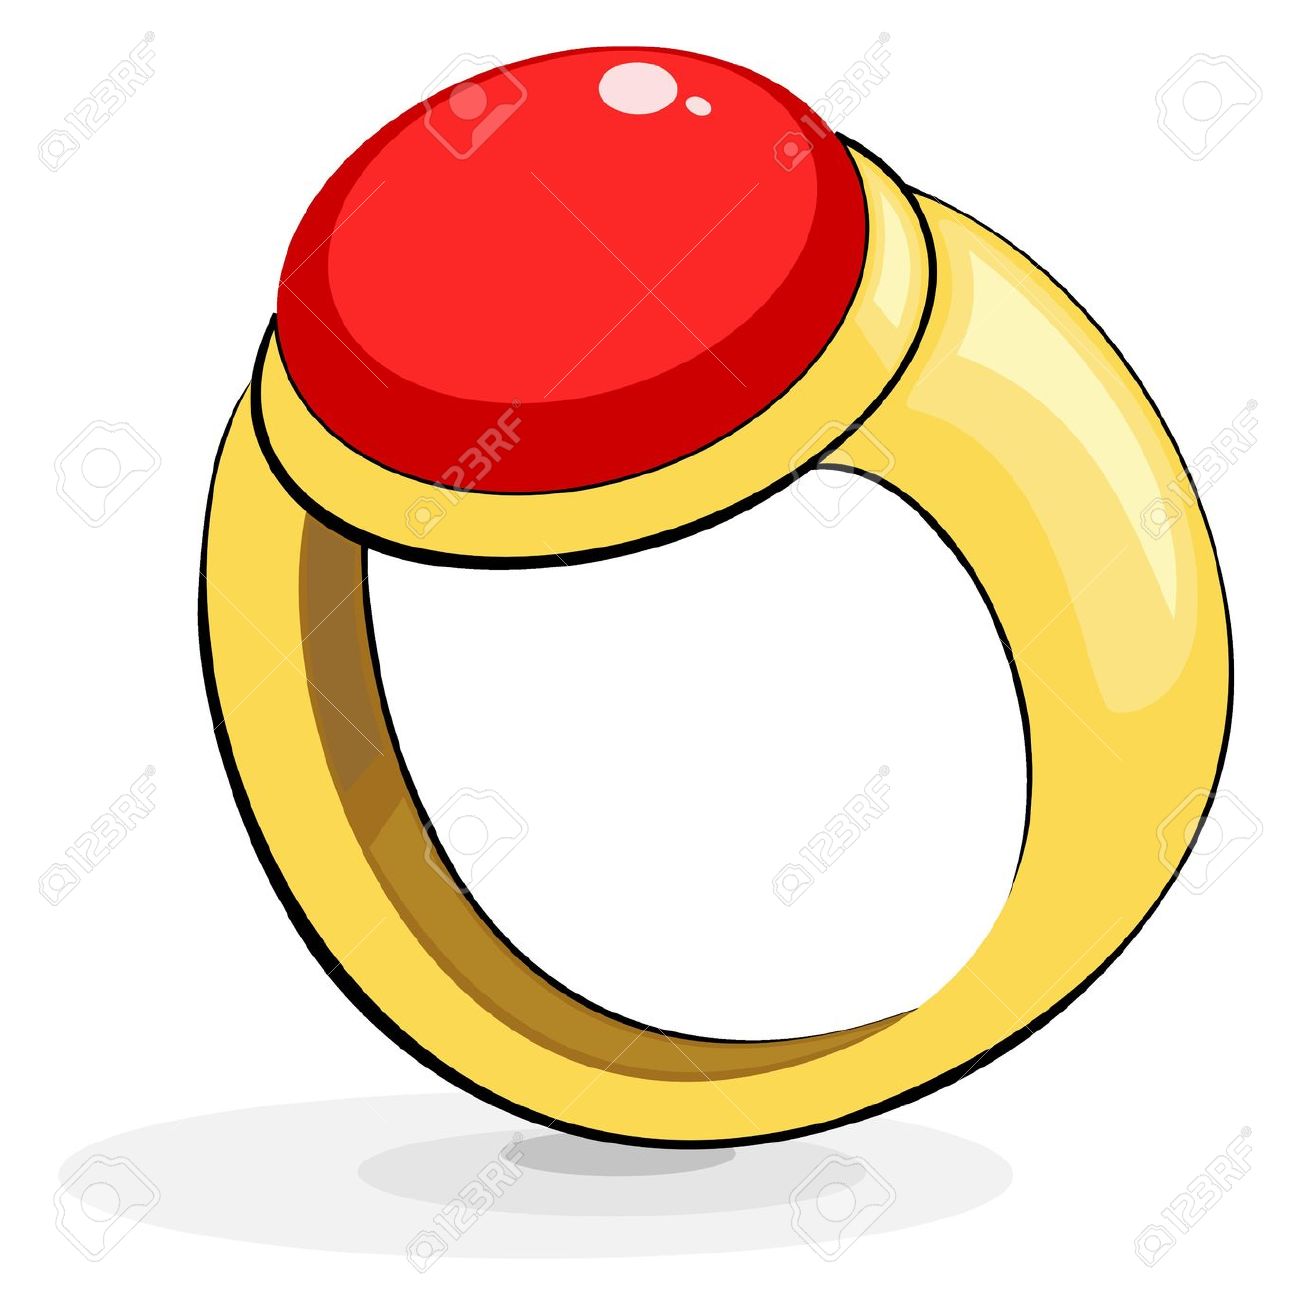 ... Ring Clipart; Ring Clipart